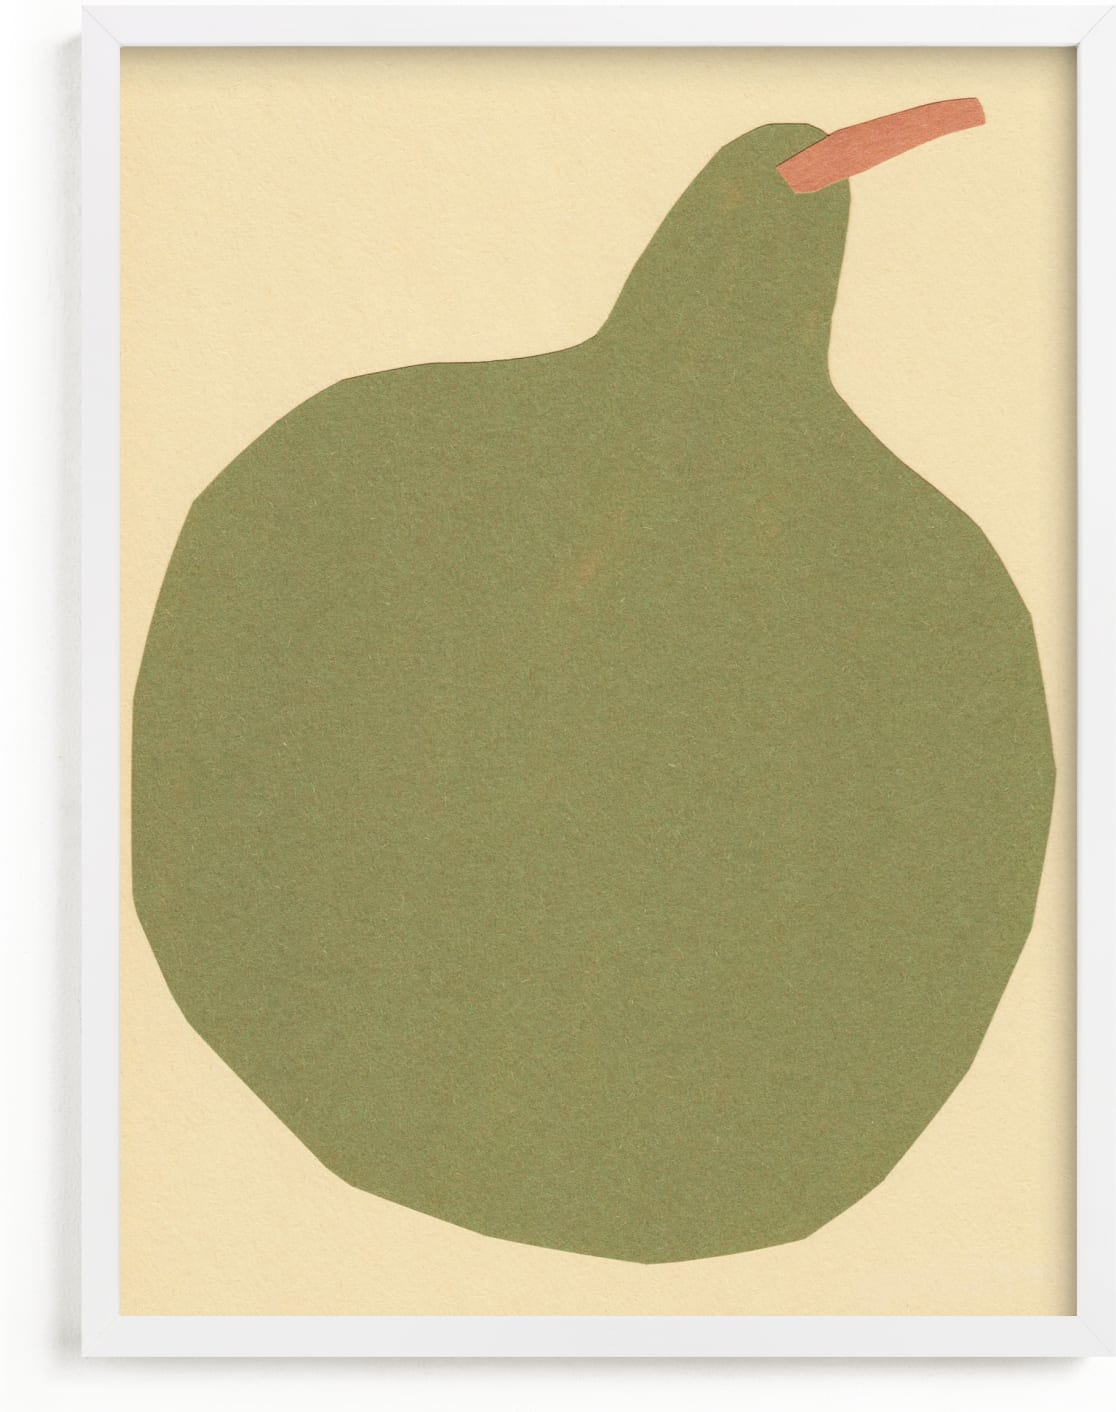 This is a brown art by Elliot Stokes called Big Pear.